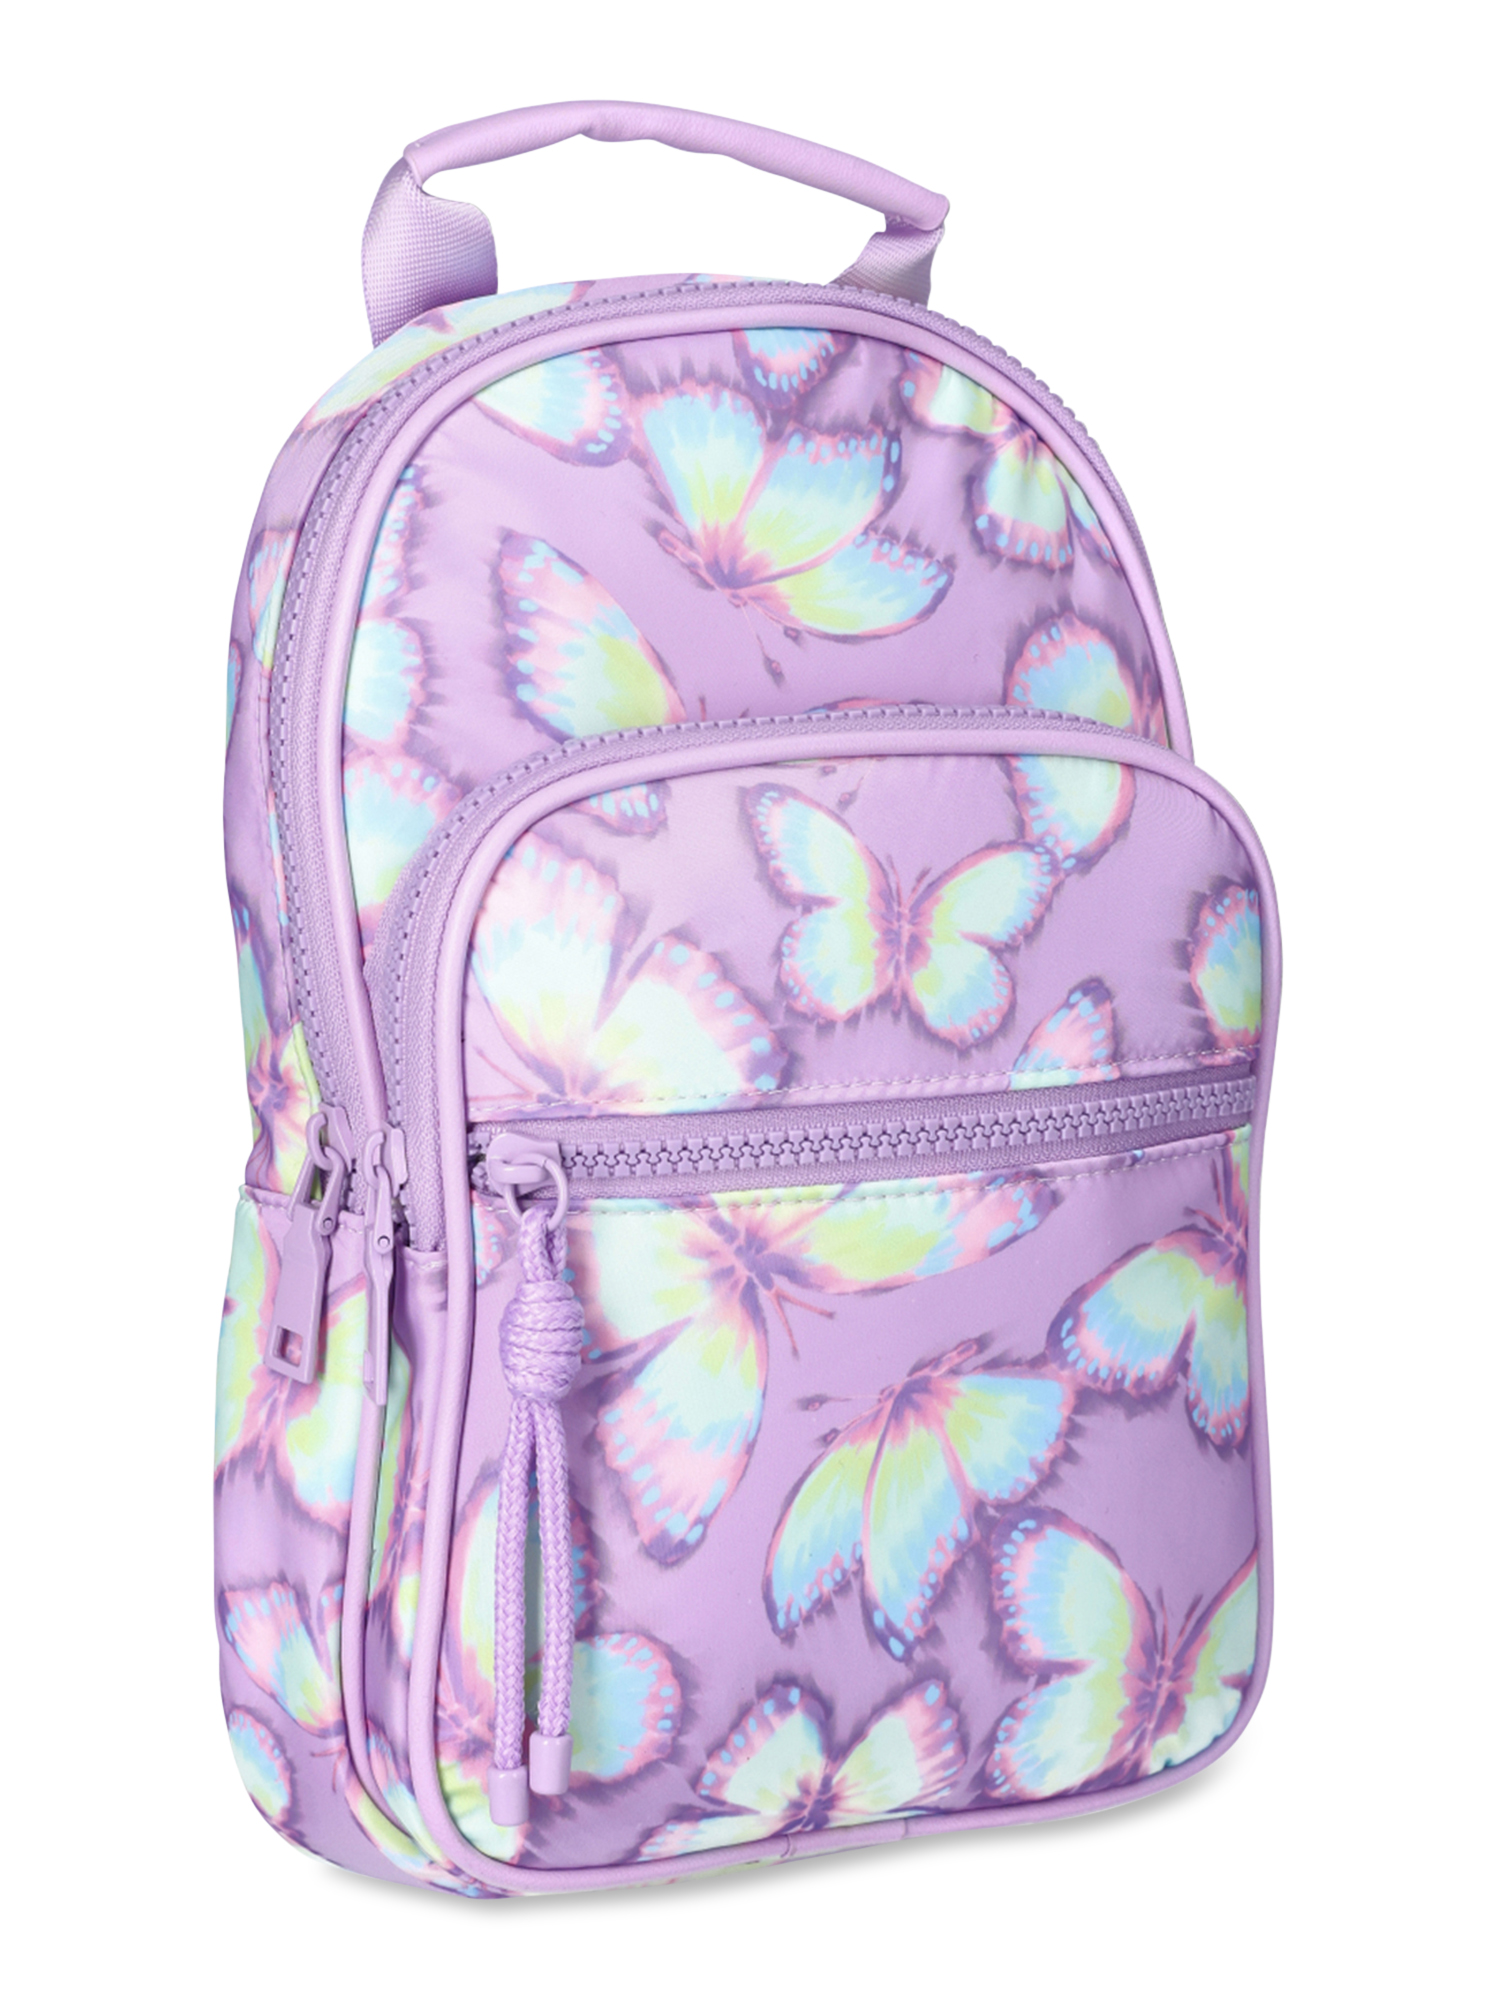 No Boundaries Women's Hands-Free Sling Bag, Lavender Butterfly - image 4 of 6